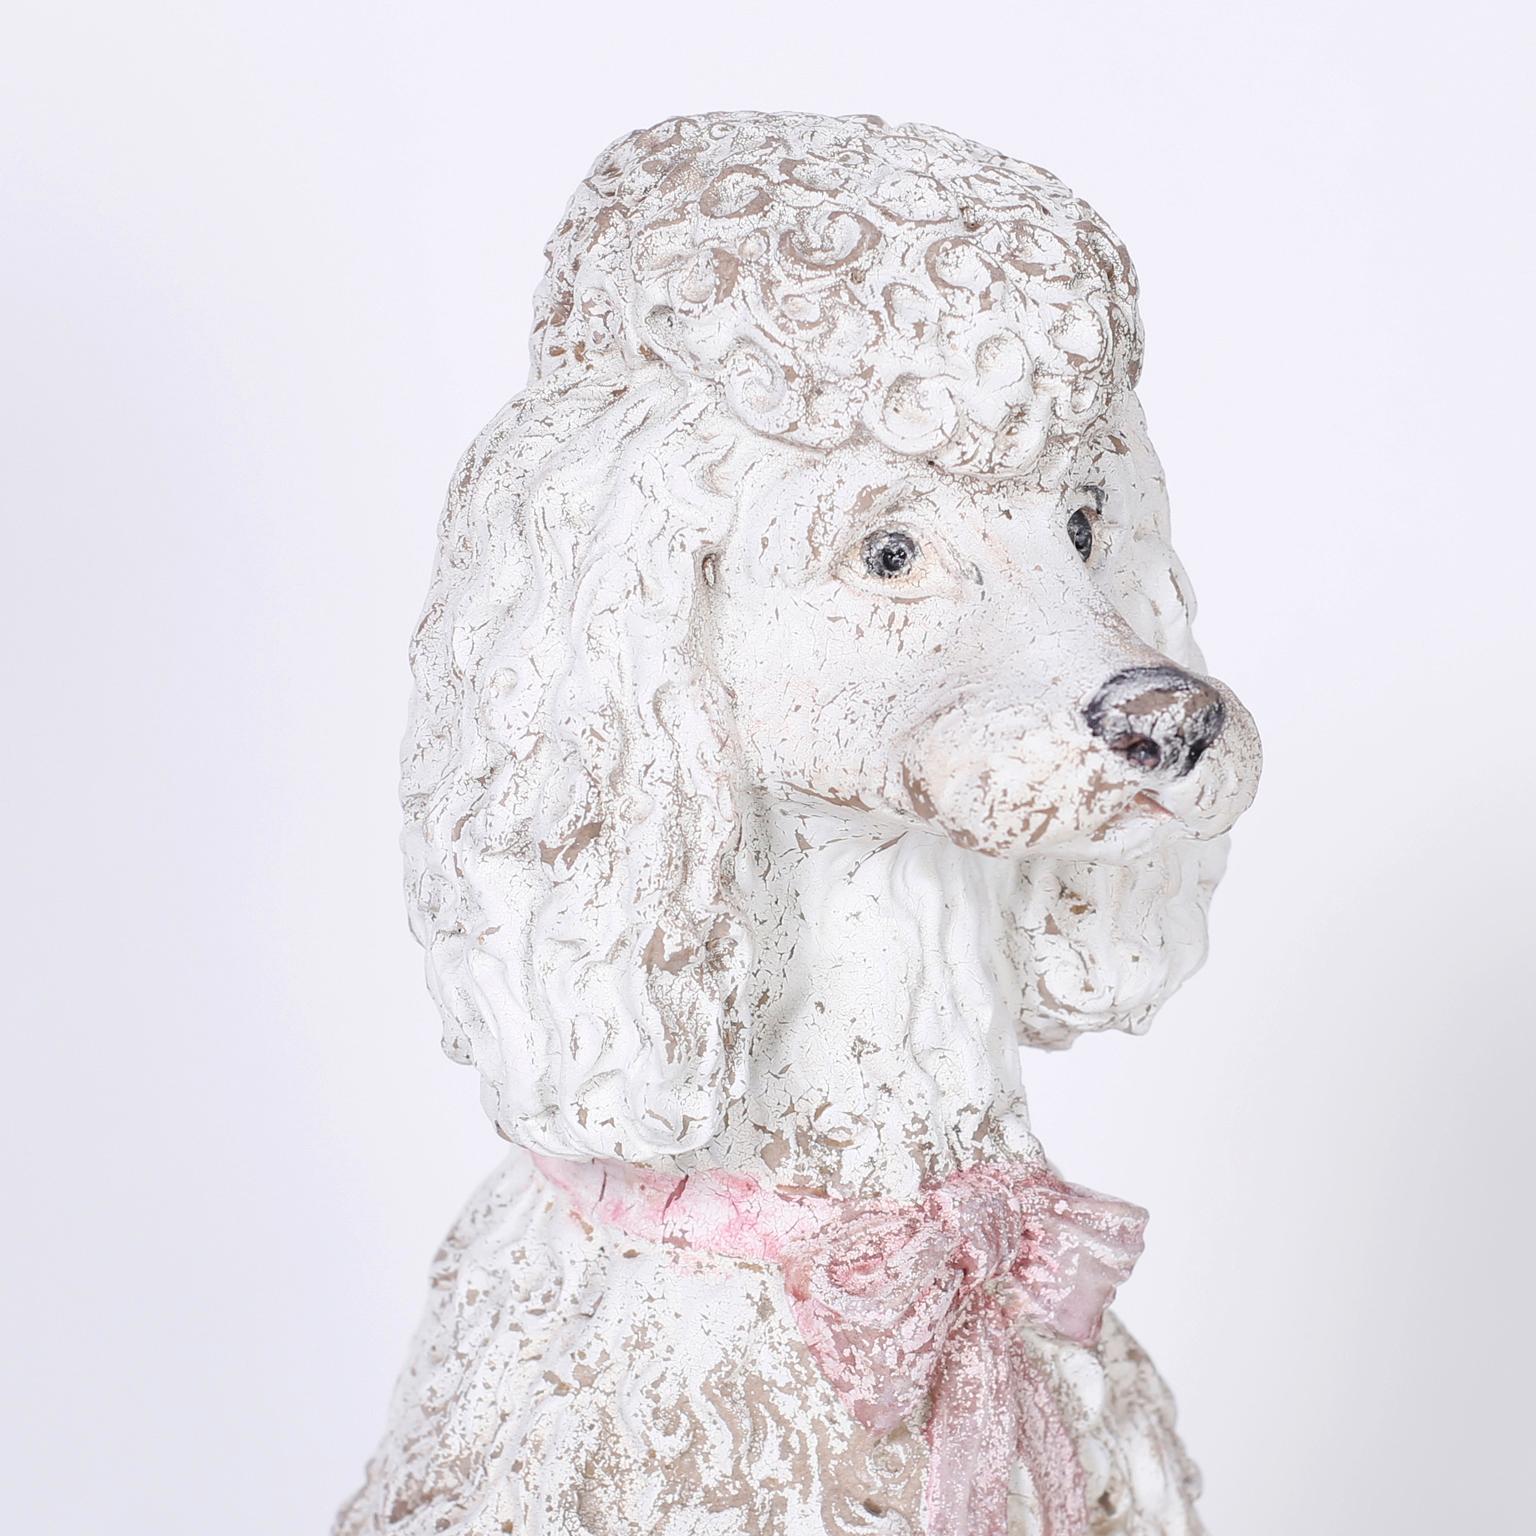 Cast composition poodle statue with paint now worn to perfection, sitting on a decorated base with draping and tassels.